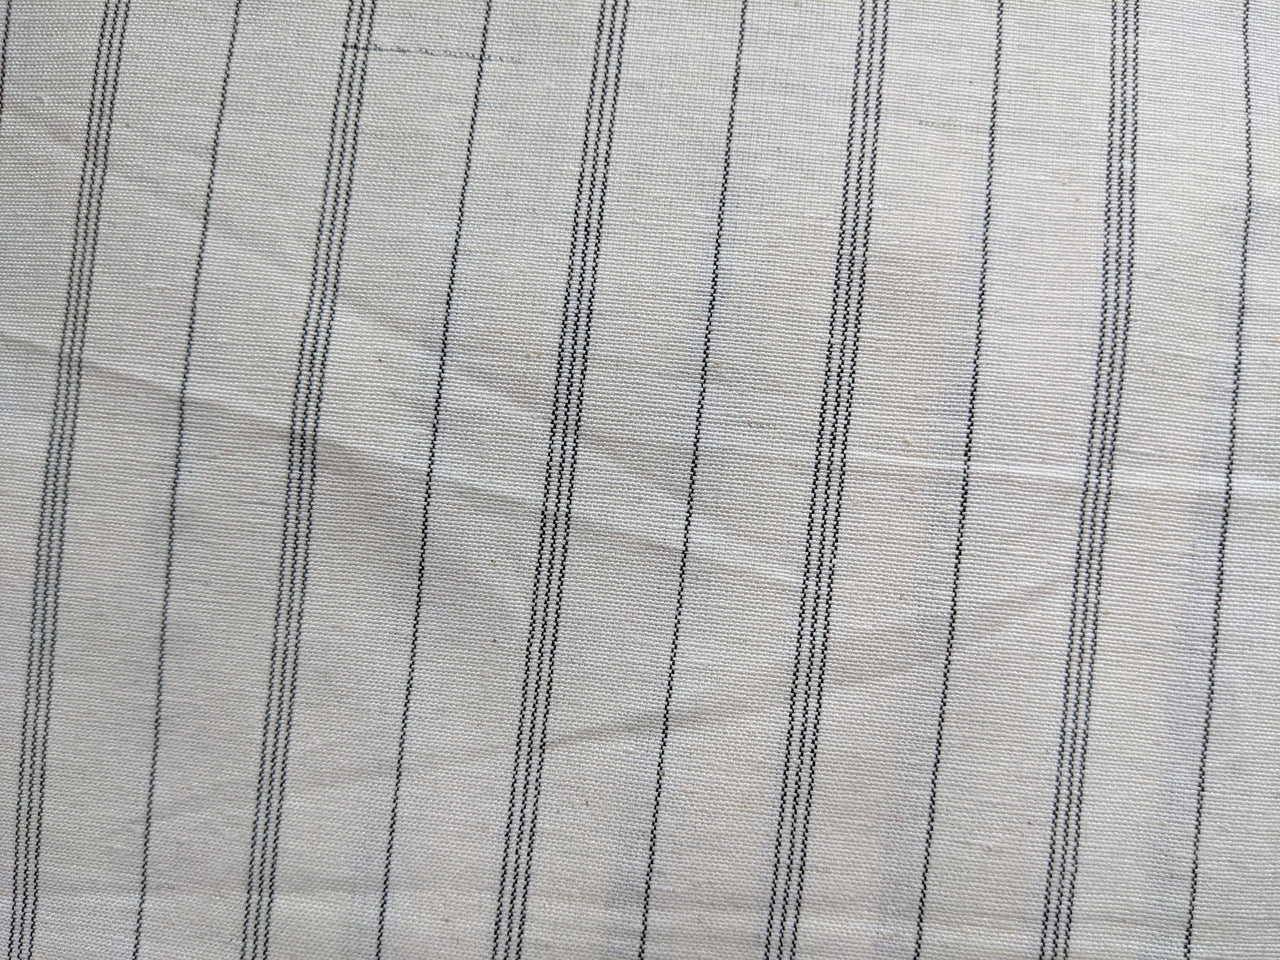 Off White Cotton Stripes Fabric, Striped Handloom Fabric, Quilting Fabric